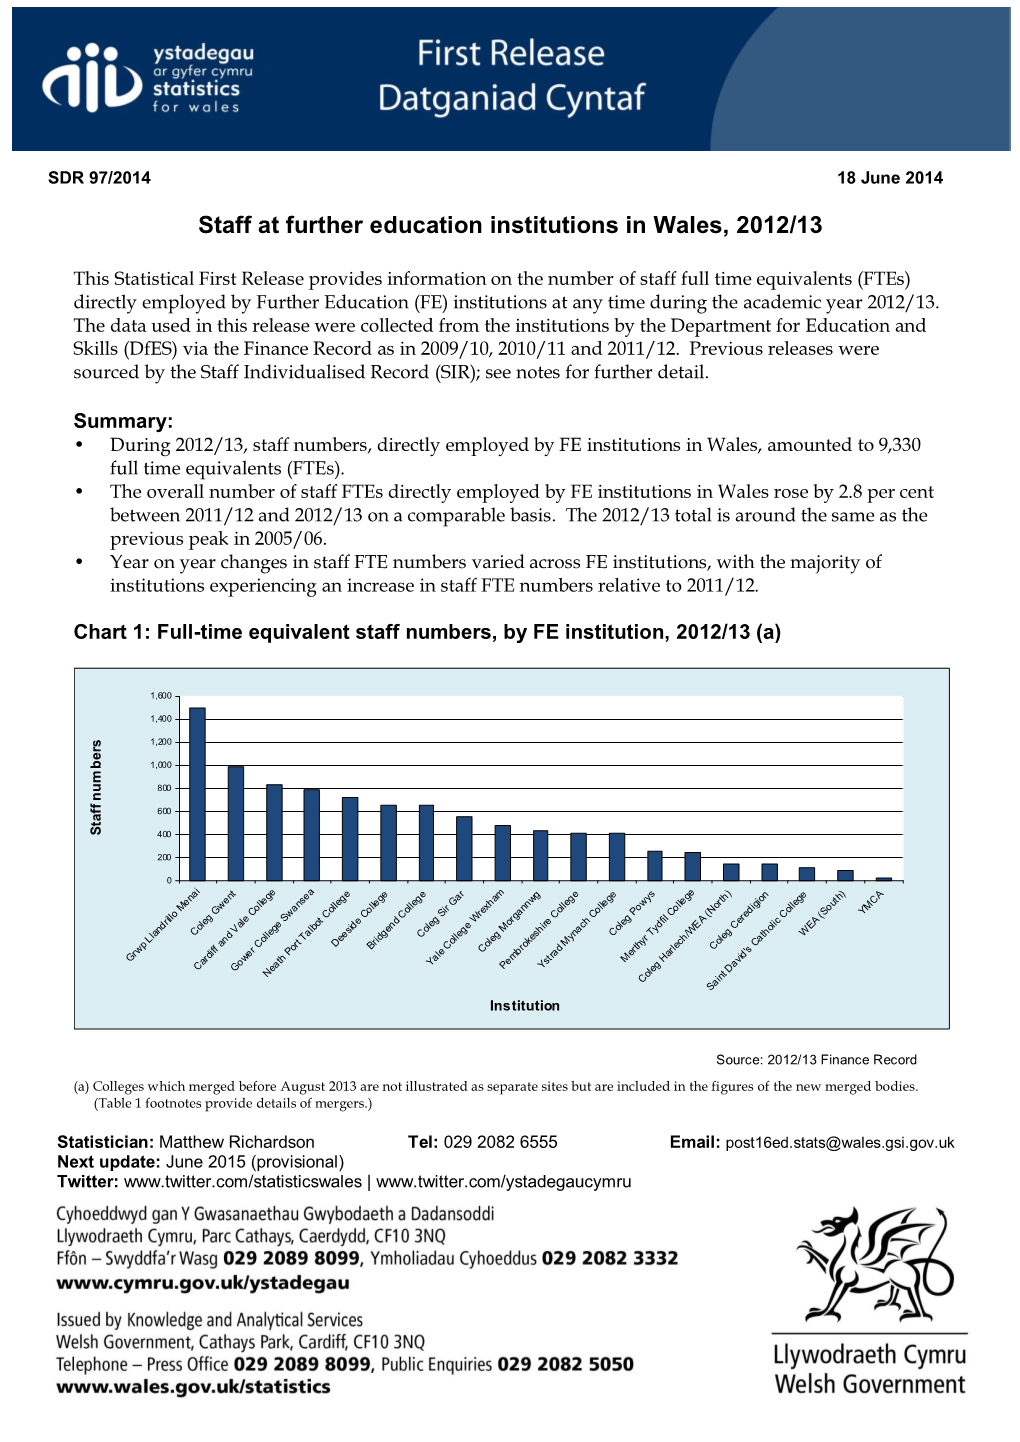 SDR 97/2014 Staff at Further Education Institutions in Wales, 2012/13